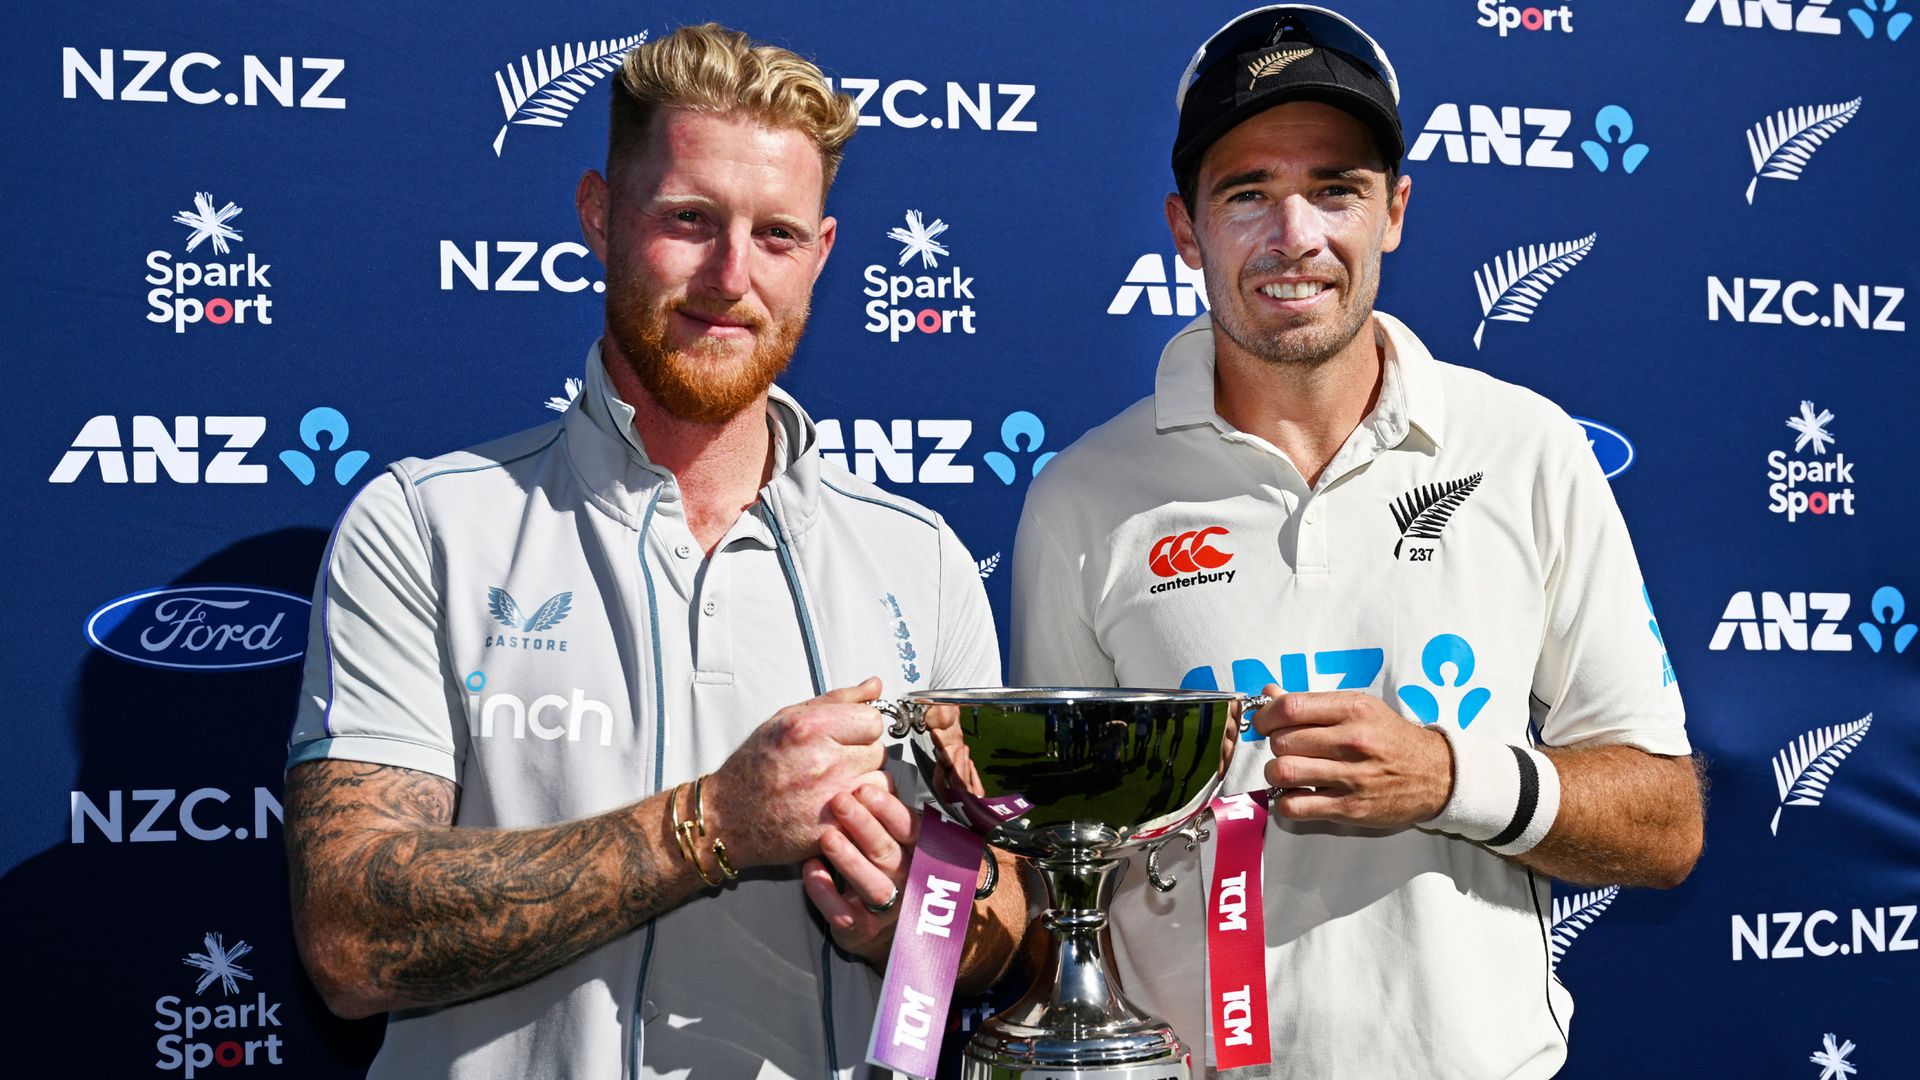 Wagner helps NZ clinch dramatic one-run win over England - as it happened